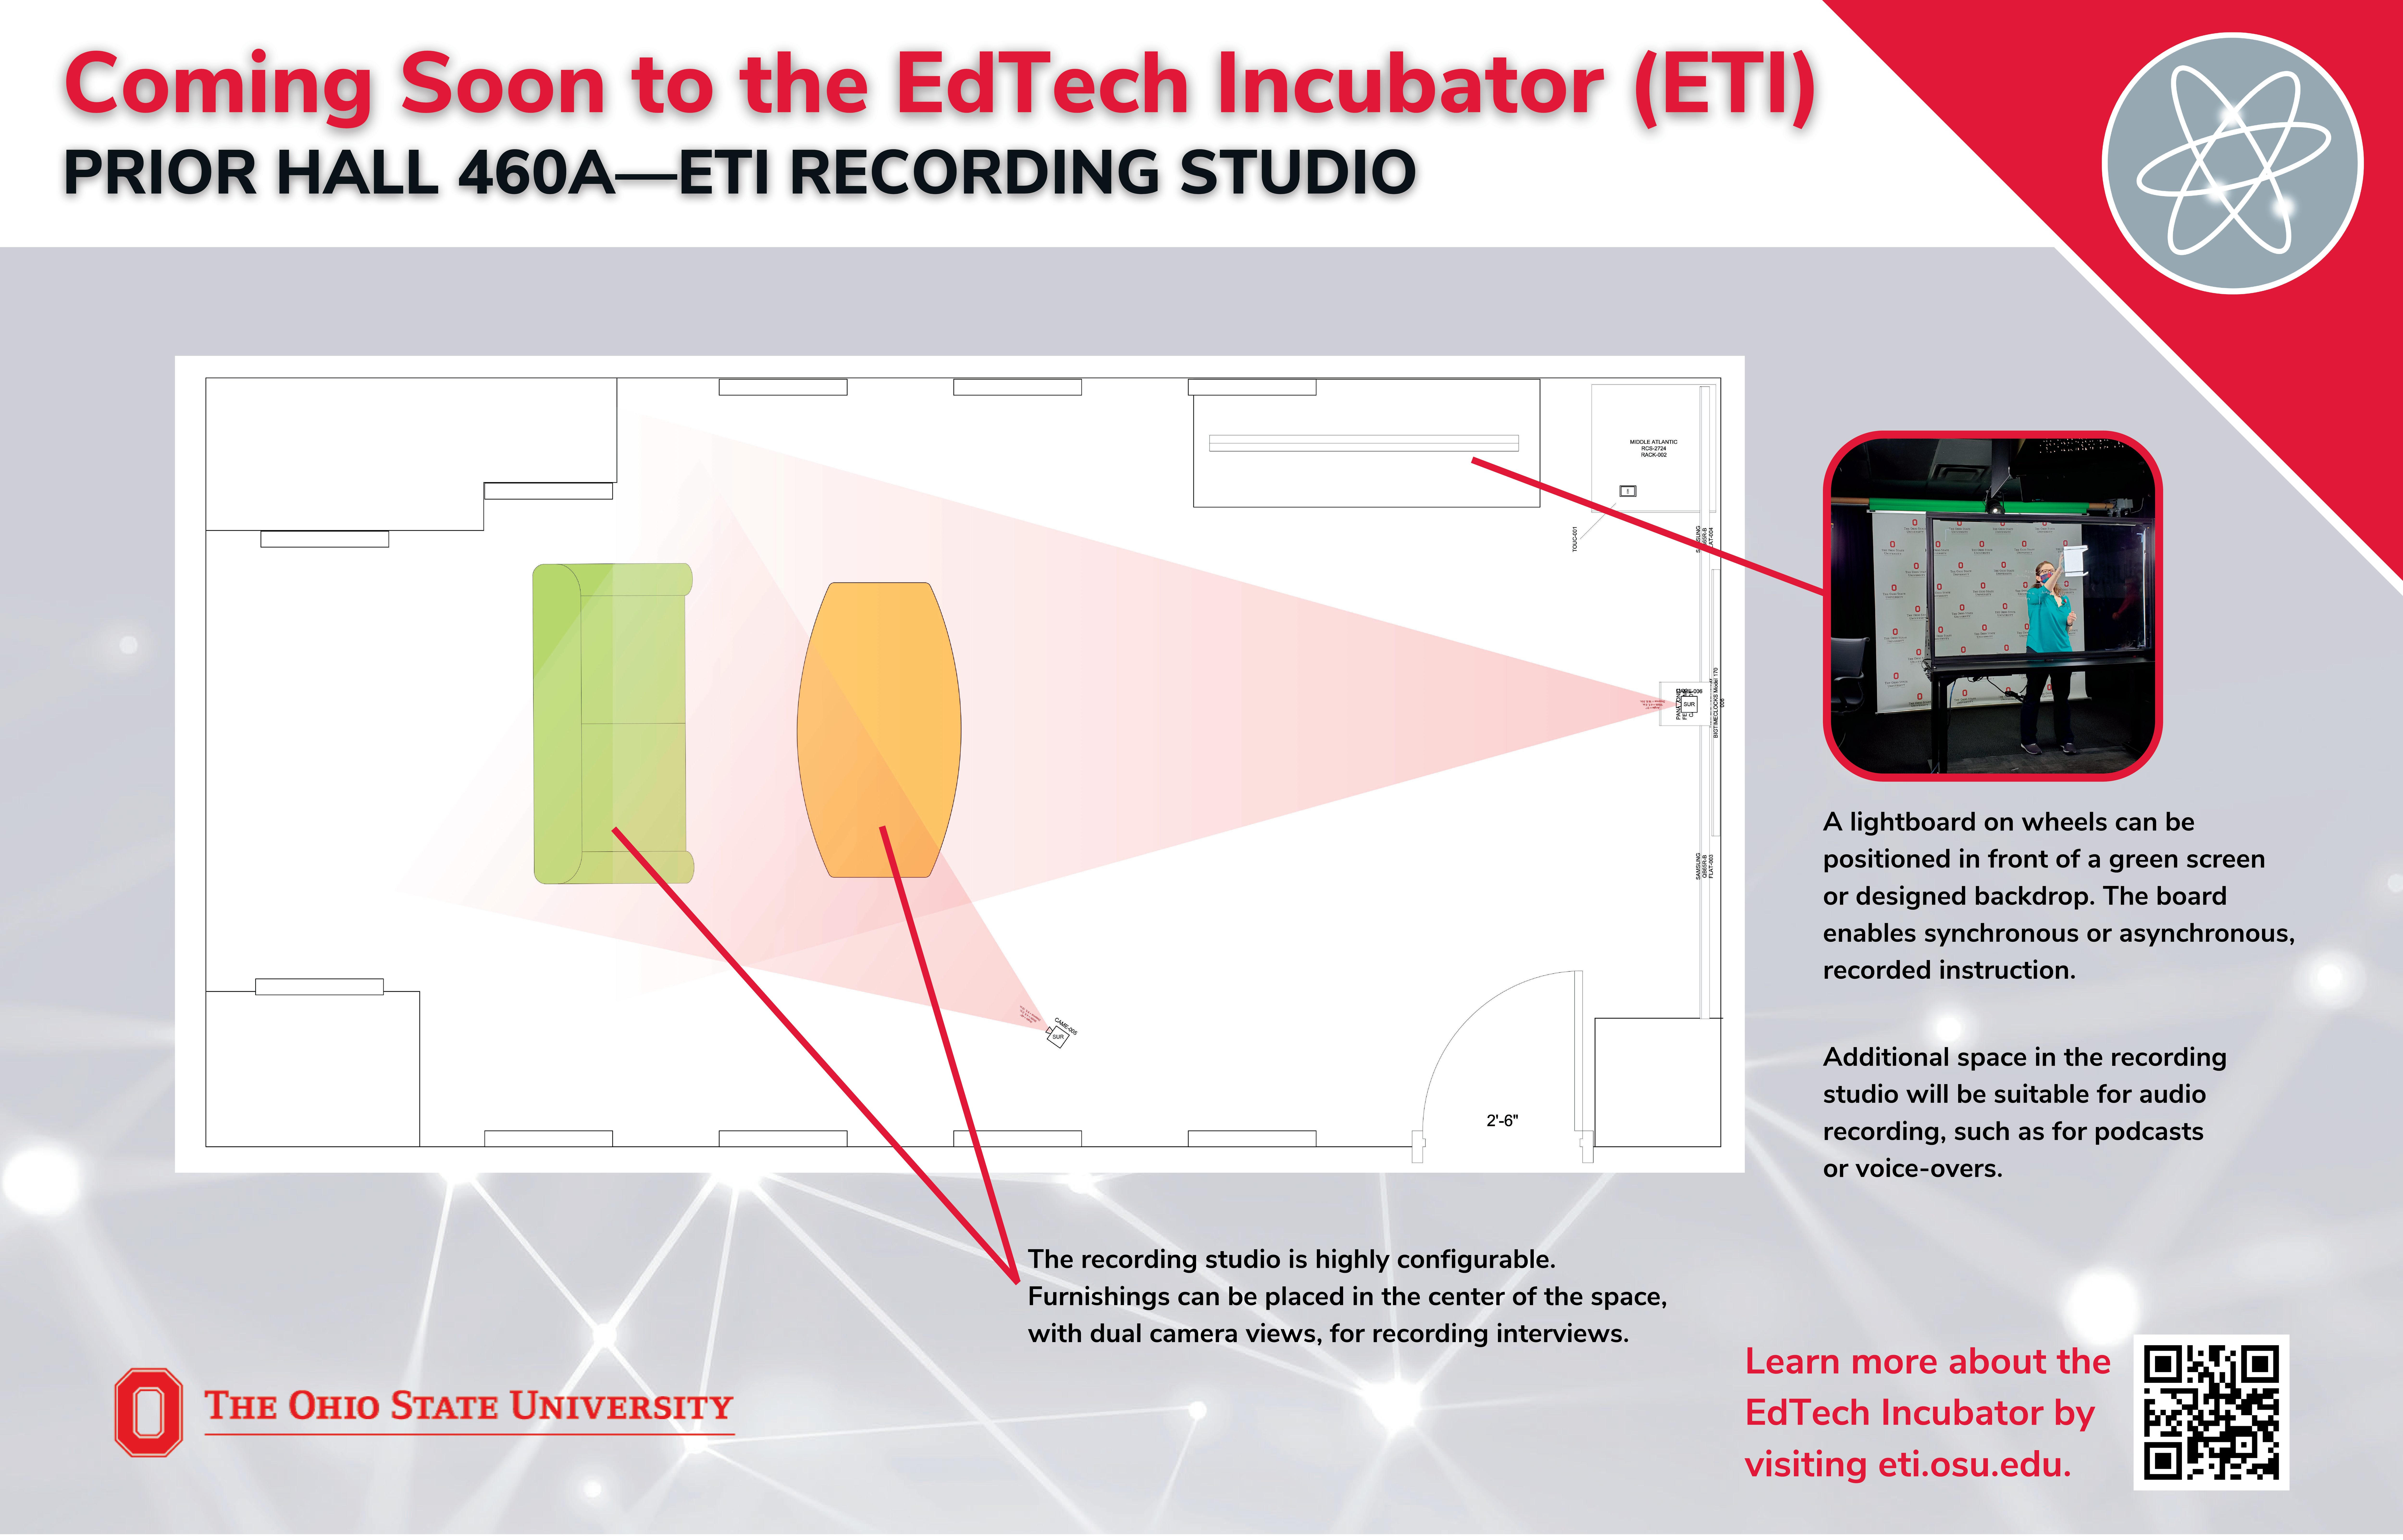 A schematic diagram showing a concept of future plans and layout for the ETI Recording Studio, coming soon to Prior Hall 460A as part of the EdTech Incubator.